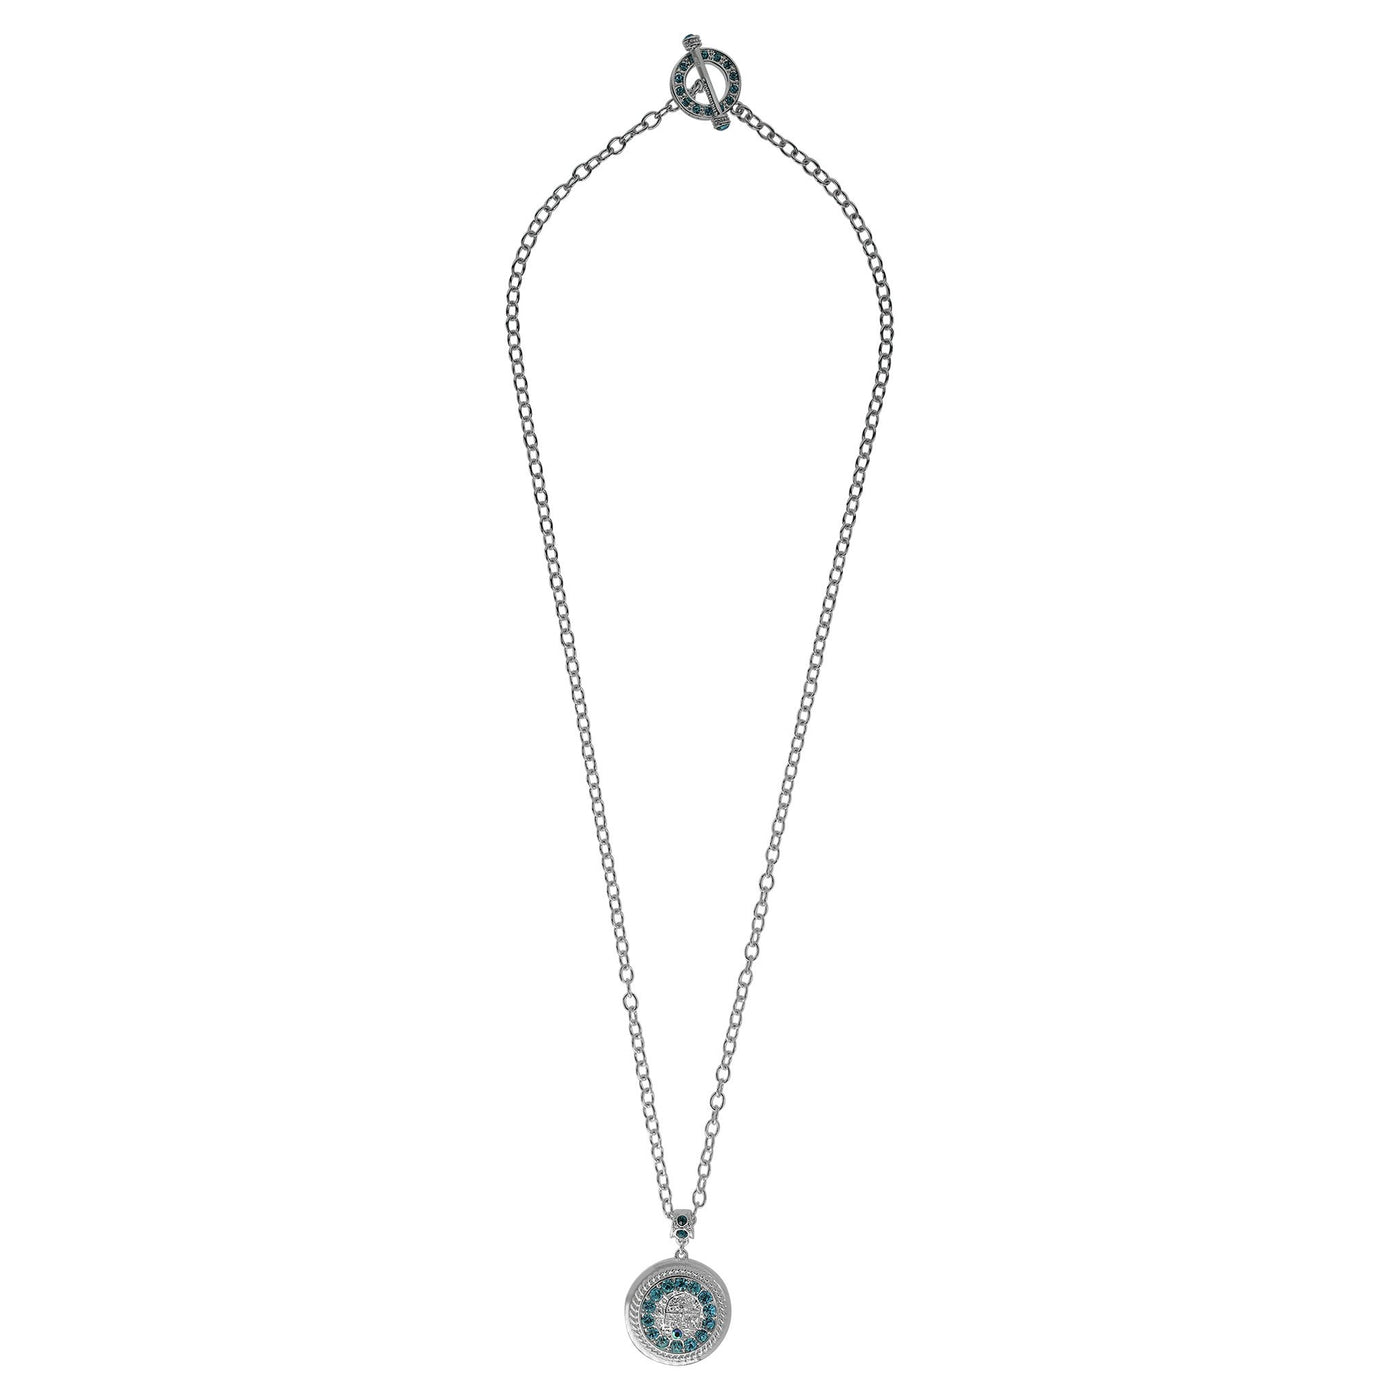 HEIDI DAUS®"Sophisticated Swag" Chain Crystal Pendant Toggle Necklace